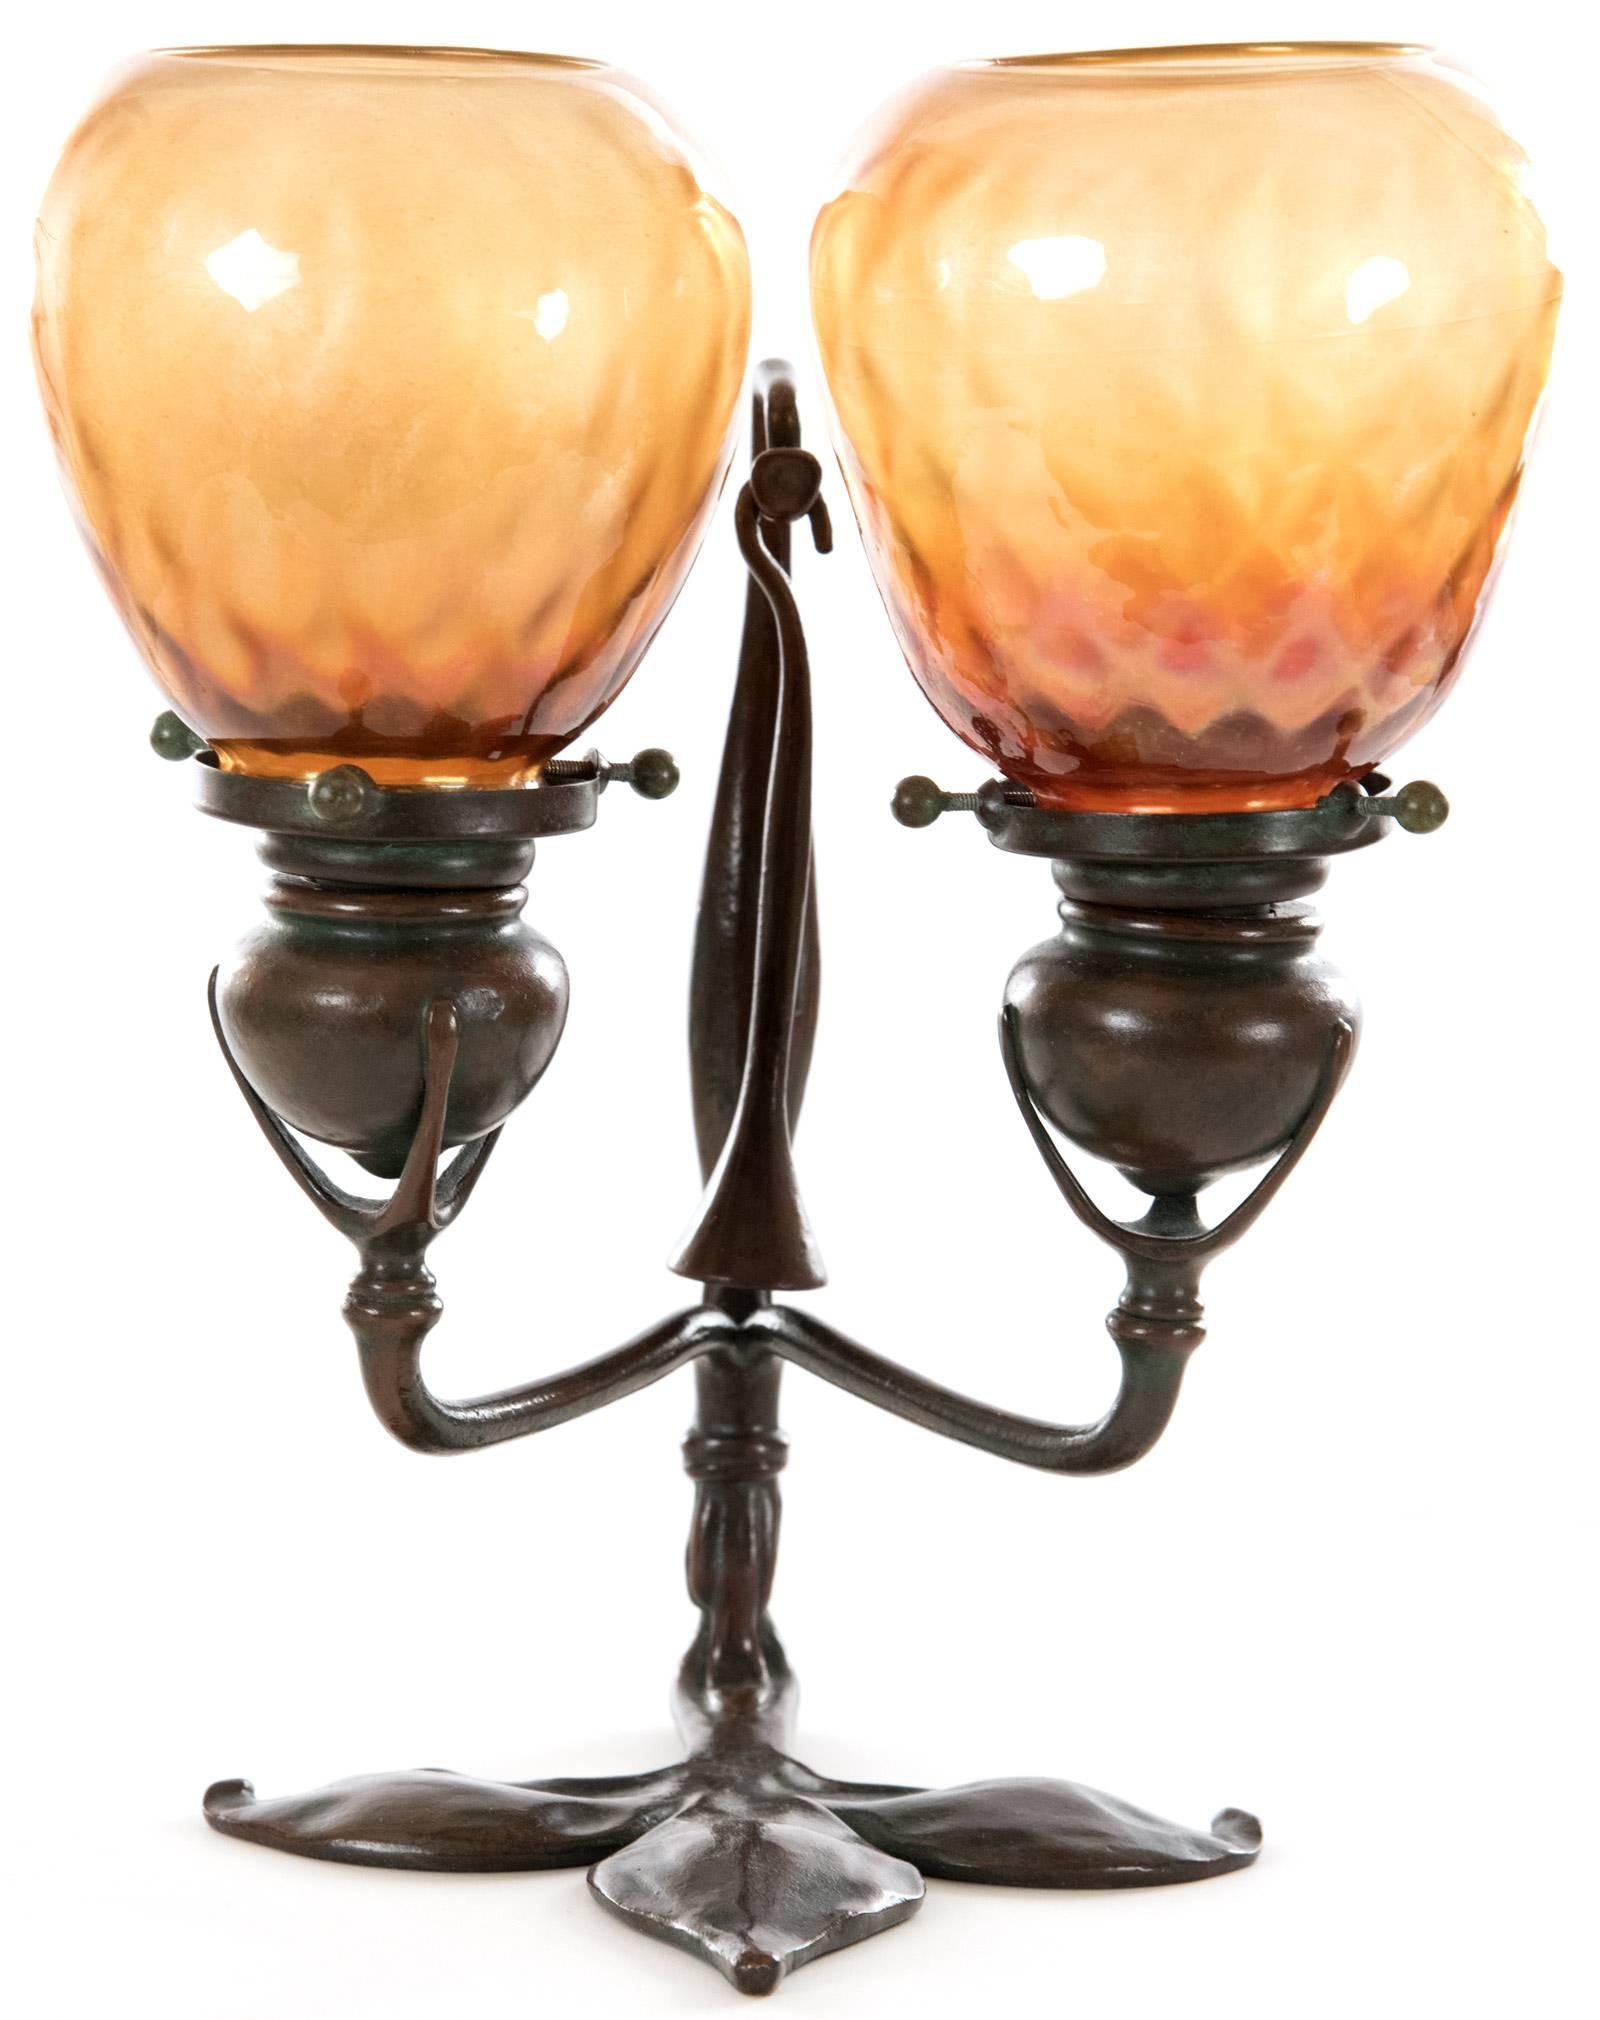 An early 20th century, circa 1910, Tiffany Studios bronze and favrile glass two-light table lamp with a fleur-de-lis formed base, including the original suspended bronze candle snuffer. The original candle stick sconces are fitted with favrile glass